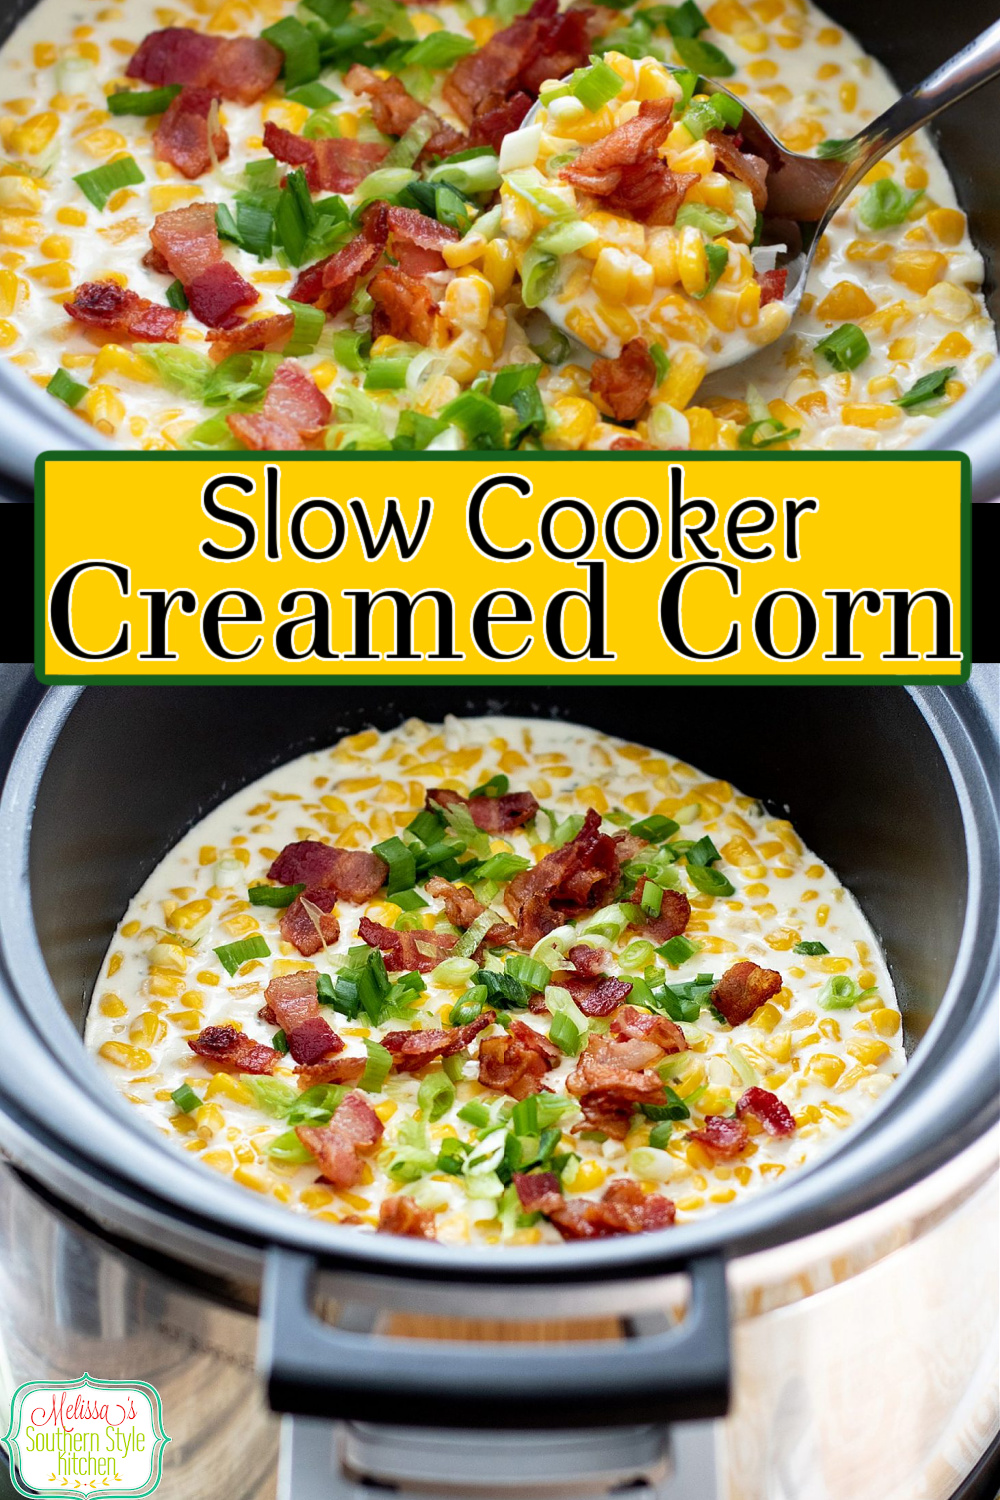 Five minutes to prep and the slow cooker does the rest #slowcookercreamedcorn #creamedcorn #corn #creamcorn #cornrecipes #creamedcornwithbacon #bacon #holidayrecipes #holidaysidedishes #thanksgivingrecipes #christmasrecipes #easterrecipes #southernfood #southernrecipes #dinnerideas #crockpotrecipes #slowcookerrecipes #slowcookercreamedcorn via @melissasssk